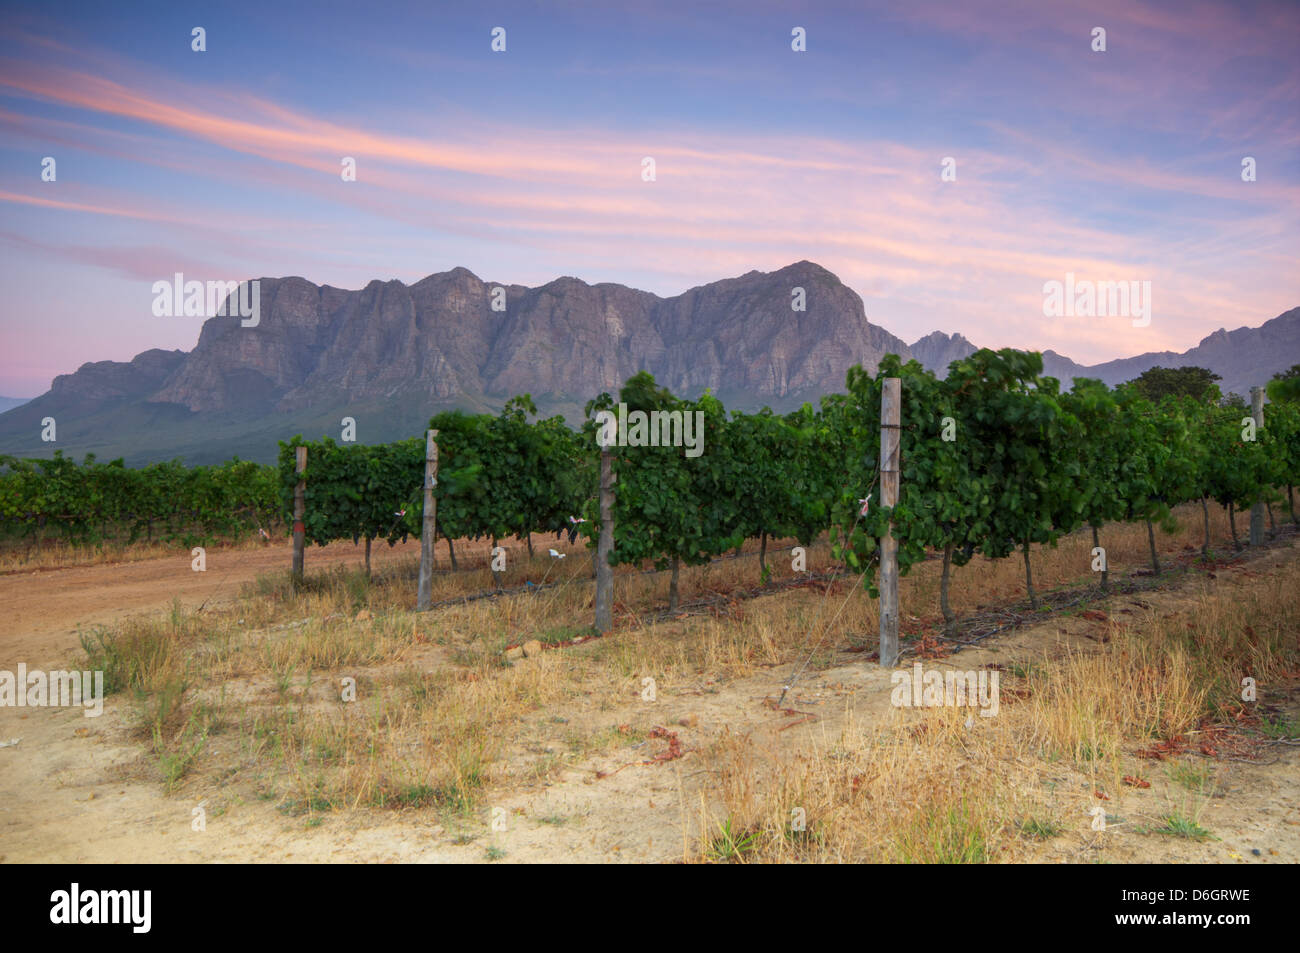 Sunset over a vineyard with Table Mountain in the background, Stellenbosch, Cape Winelands, Western Cape, South Africa Stock Photo